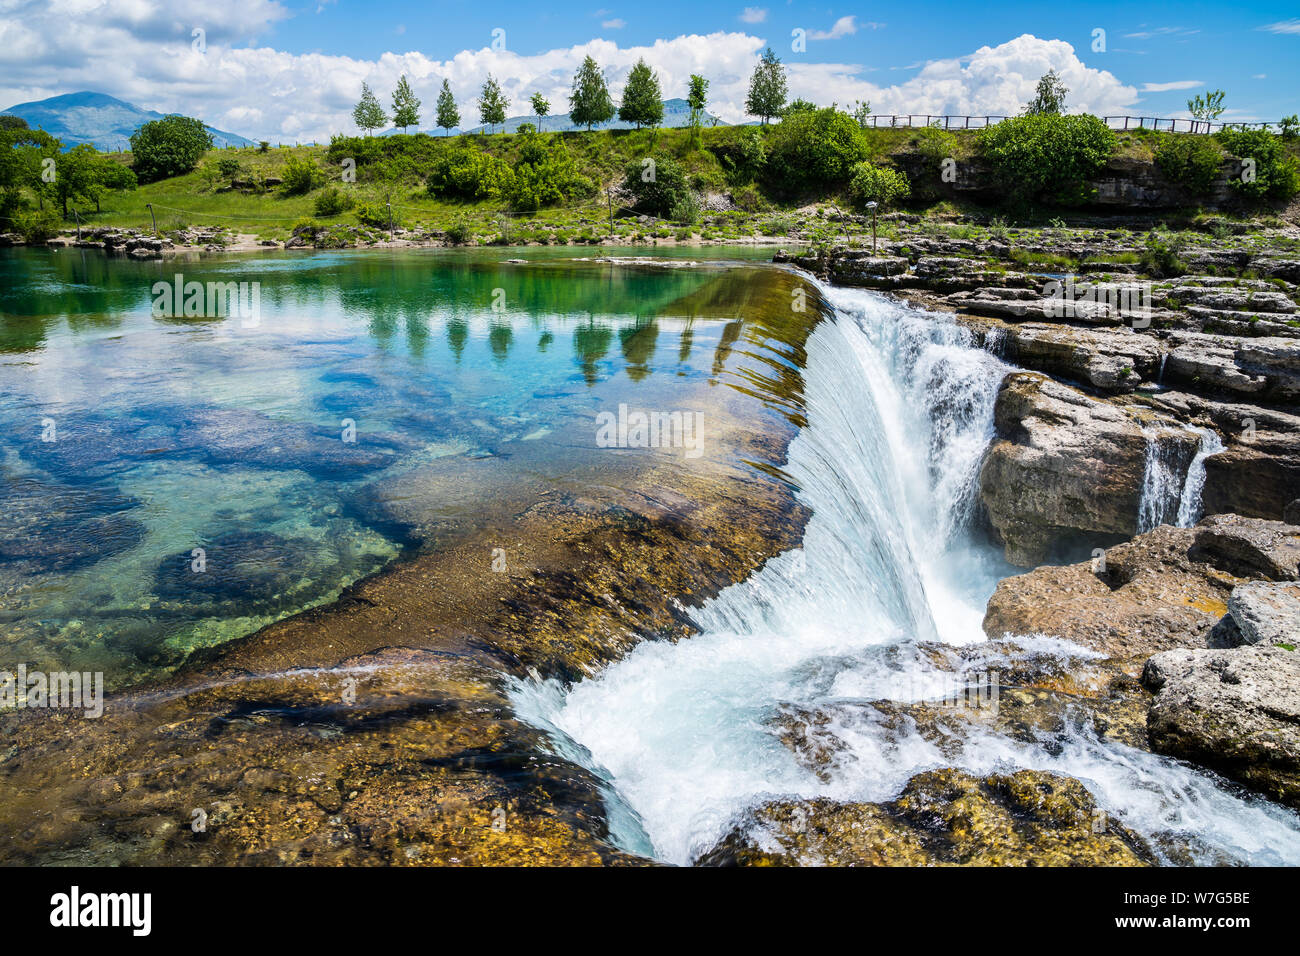 Montenegro, Spectacular waterfall in podgorica, called niagara falls of  cijevna river azure waters in untouched green nature scenery Stock Photo -  Alamy